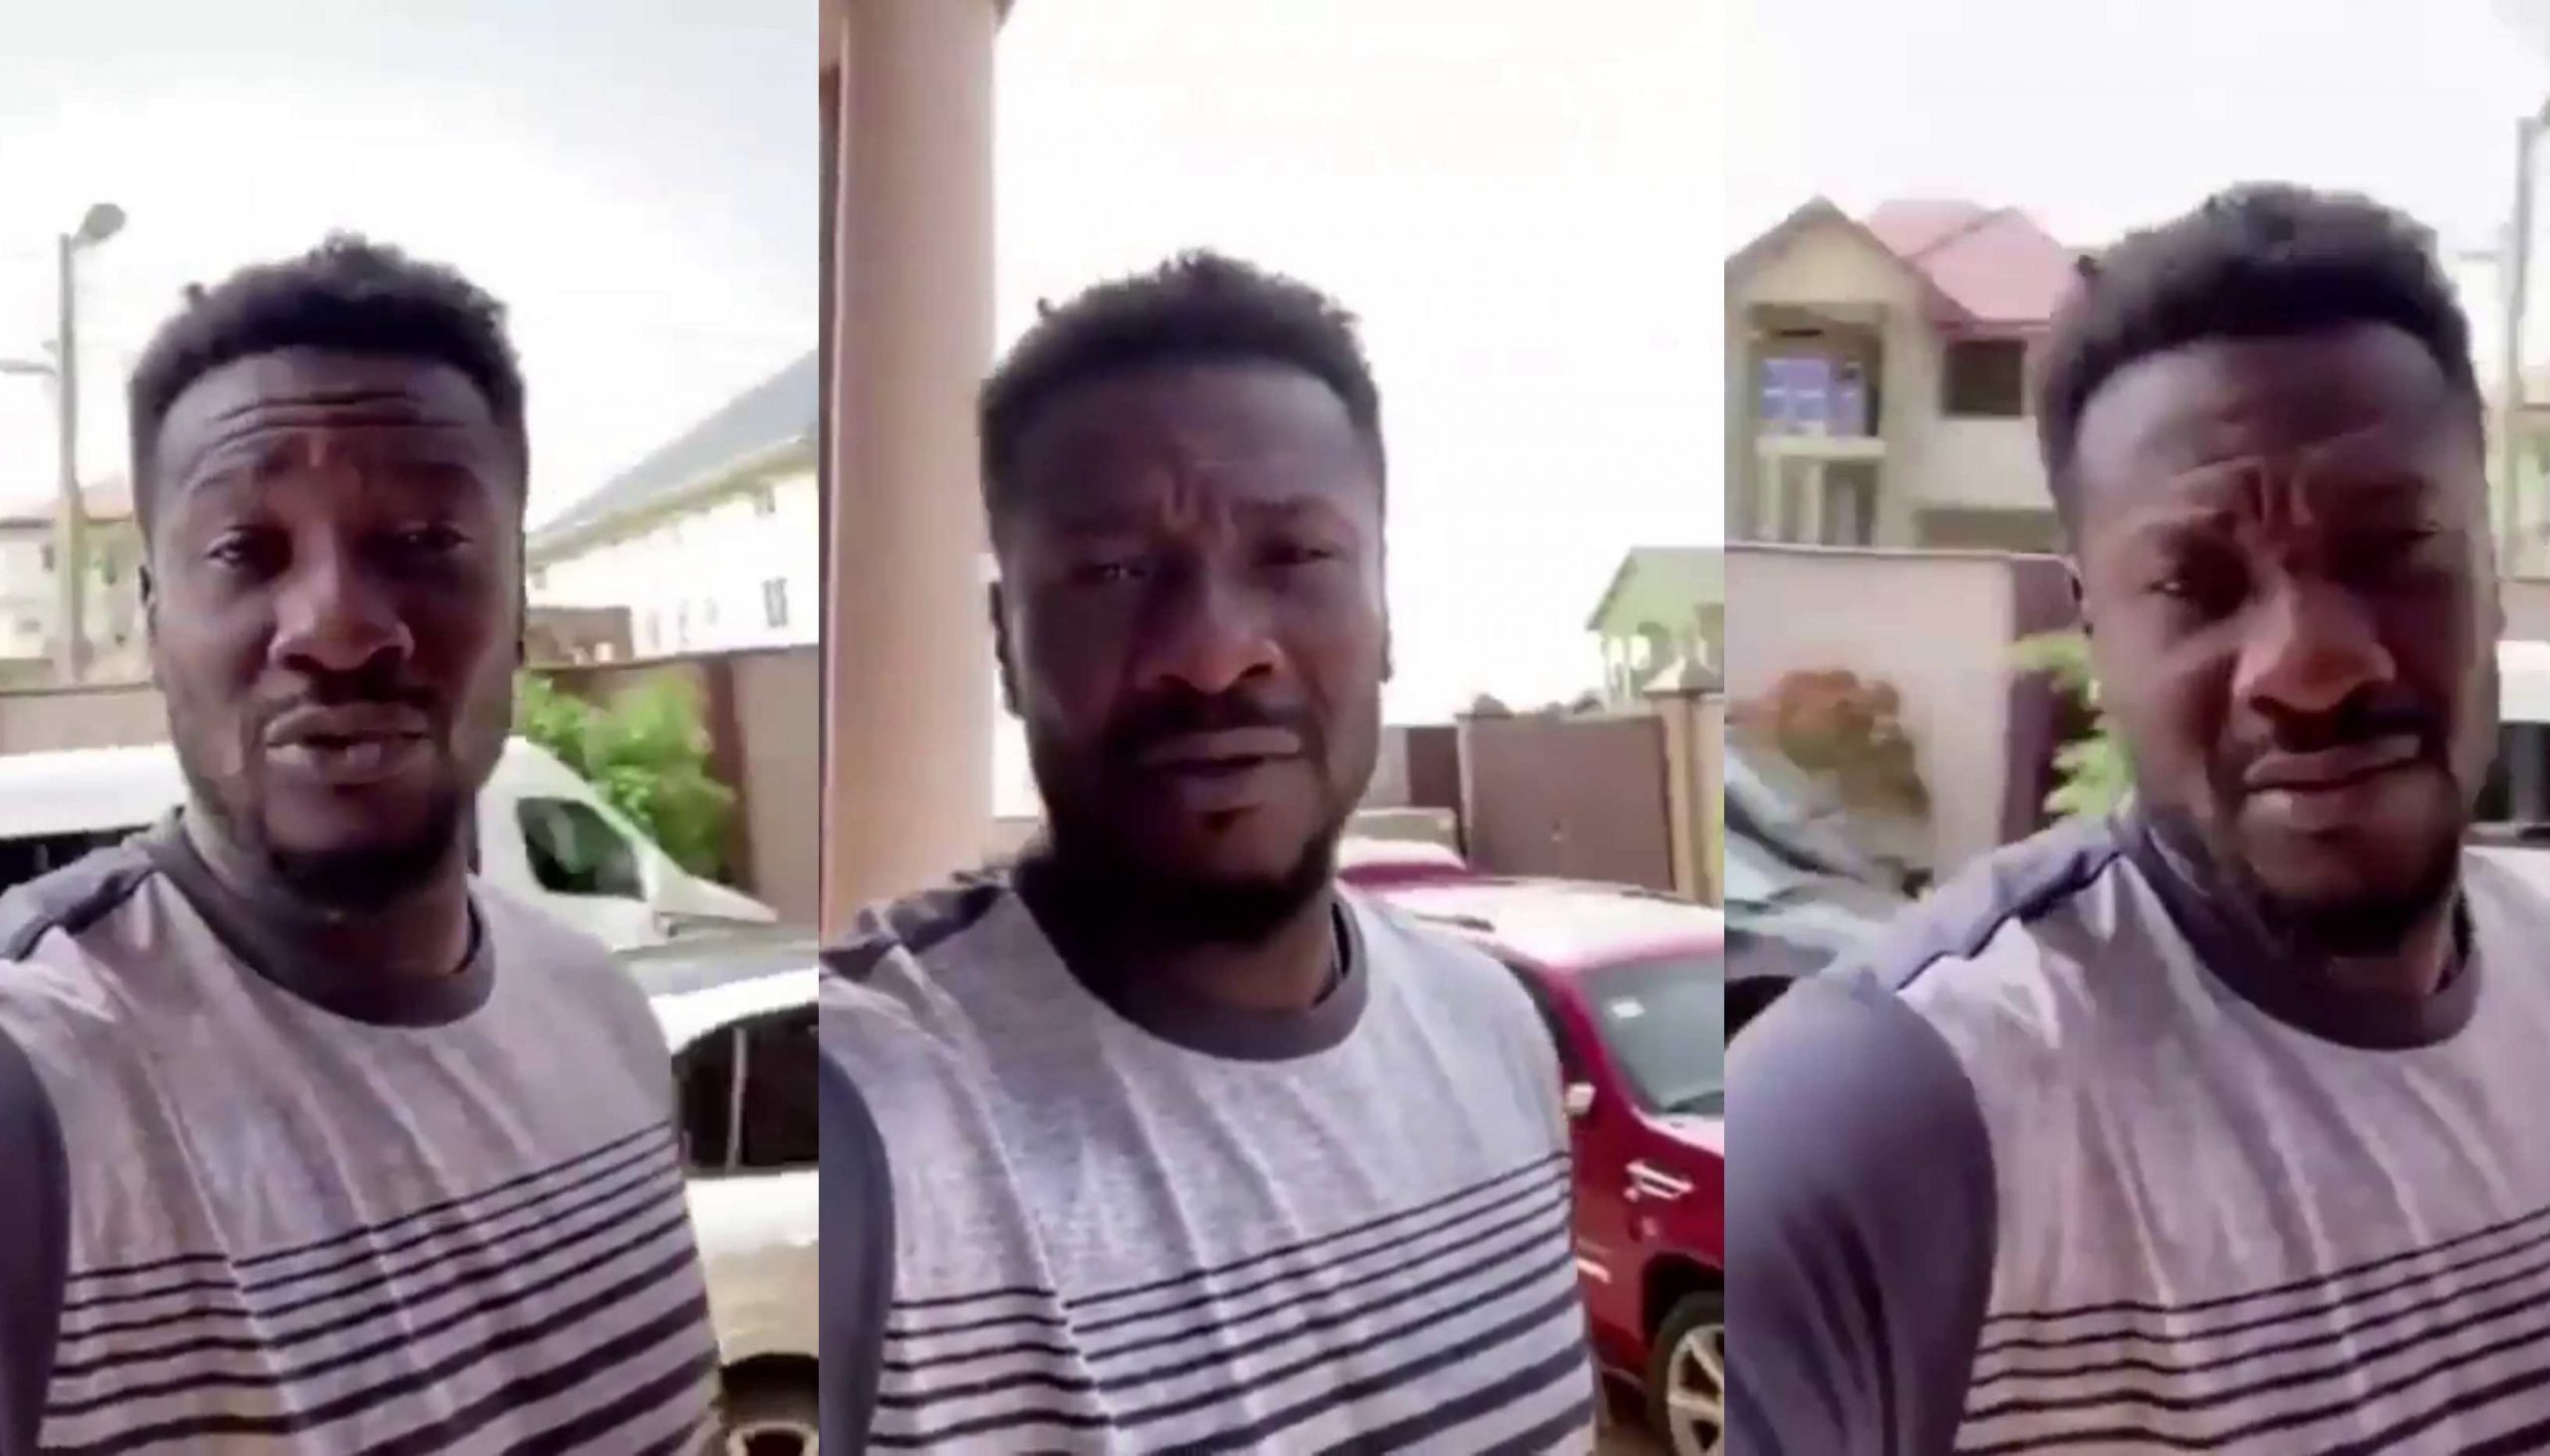 Asamoah Gyan Motivates People As He Shows Off His Fleet Of Cars - Watch Video